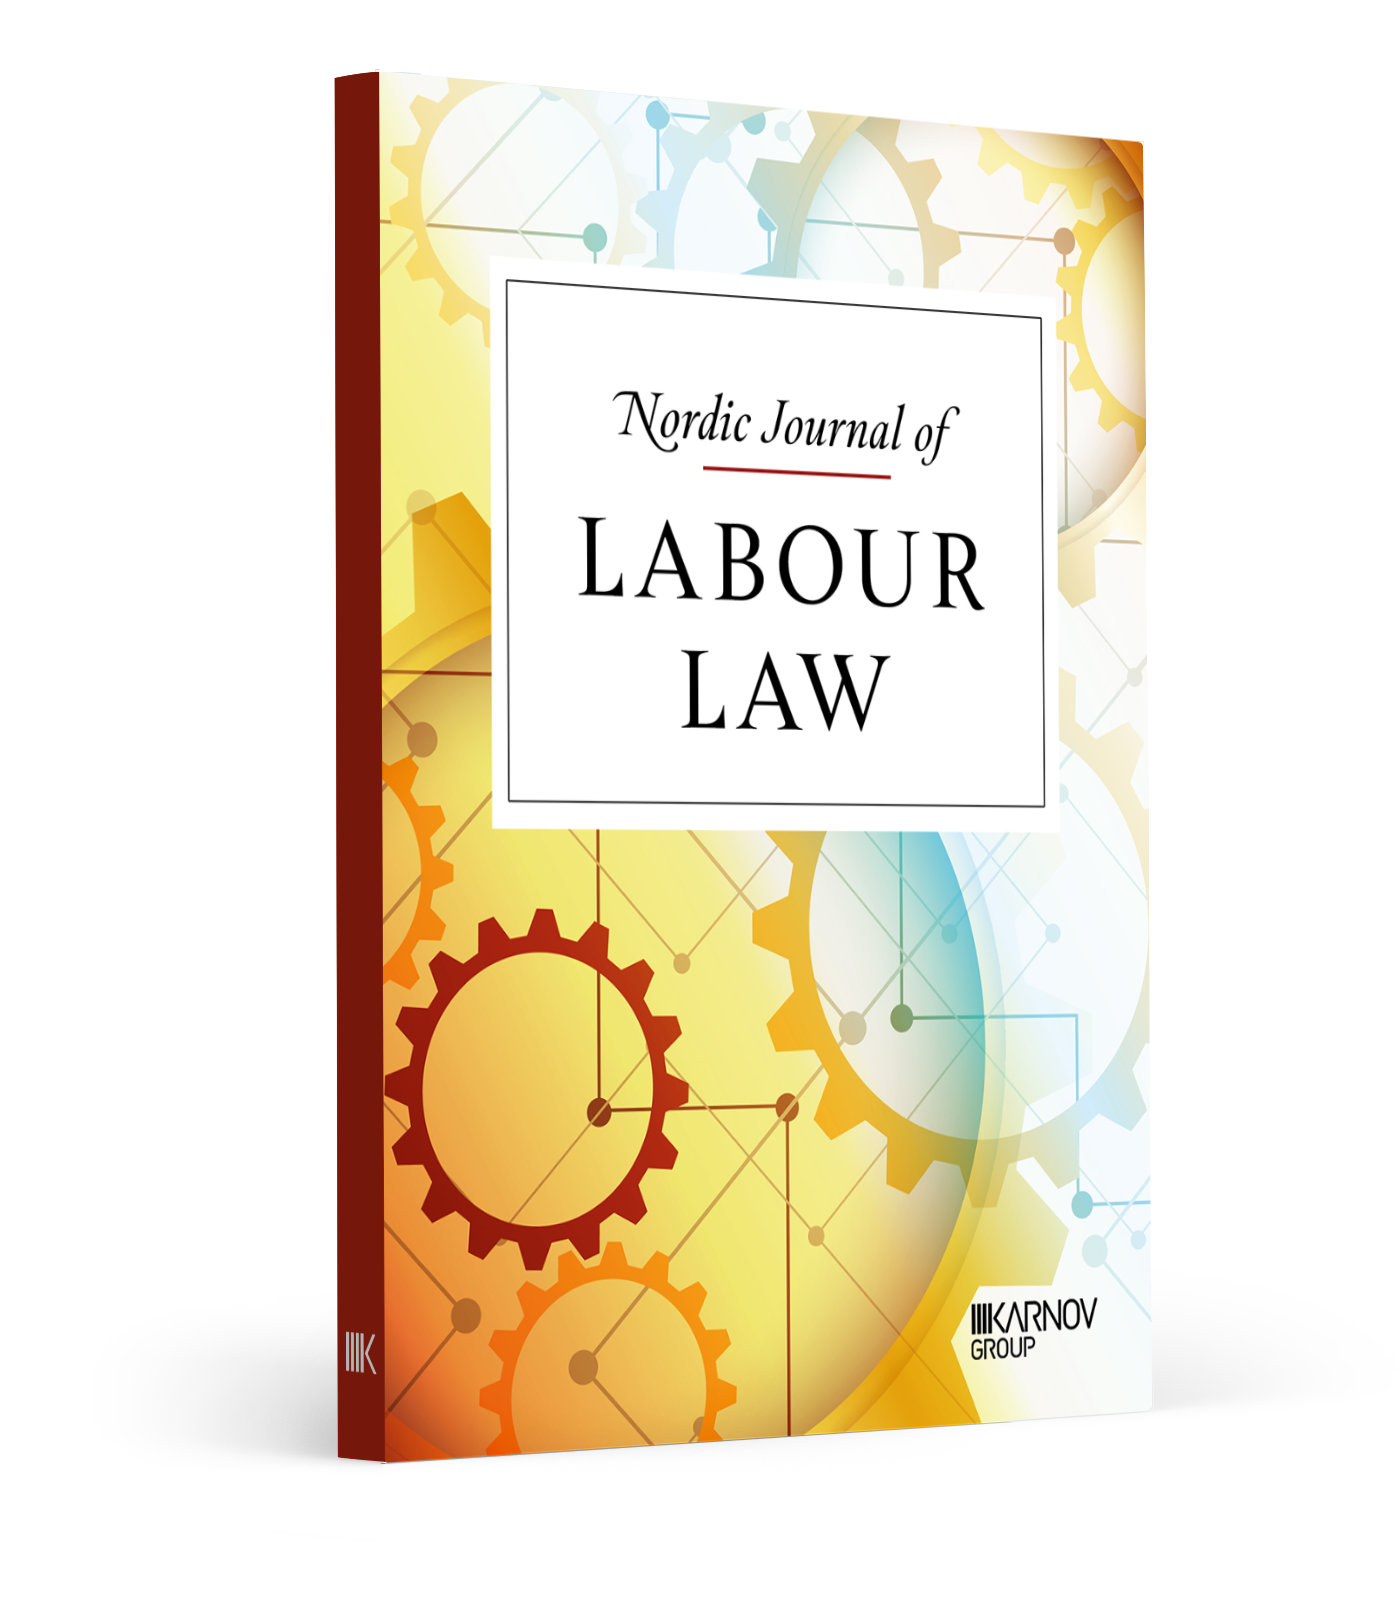 Nordic-journal-of-labour-law-1